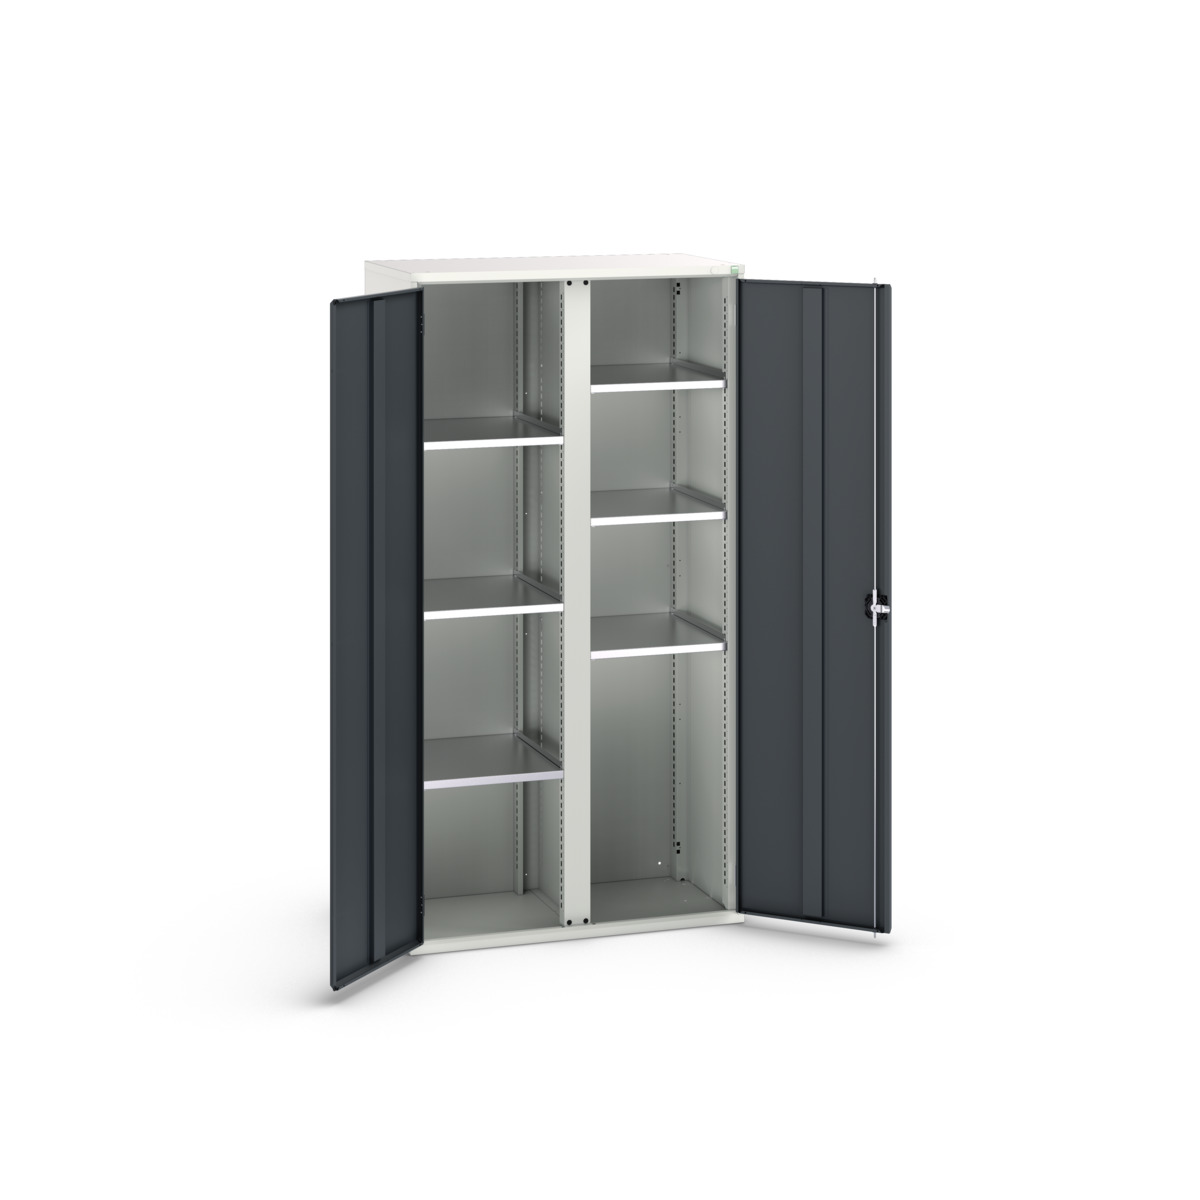 16926580. - verso kitted cupboard